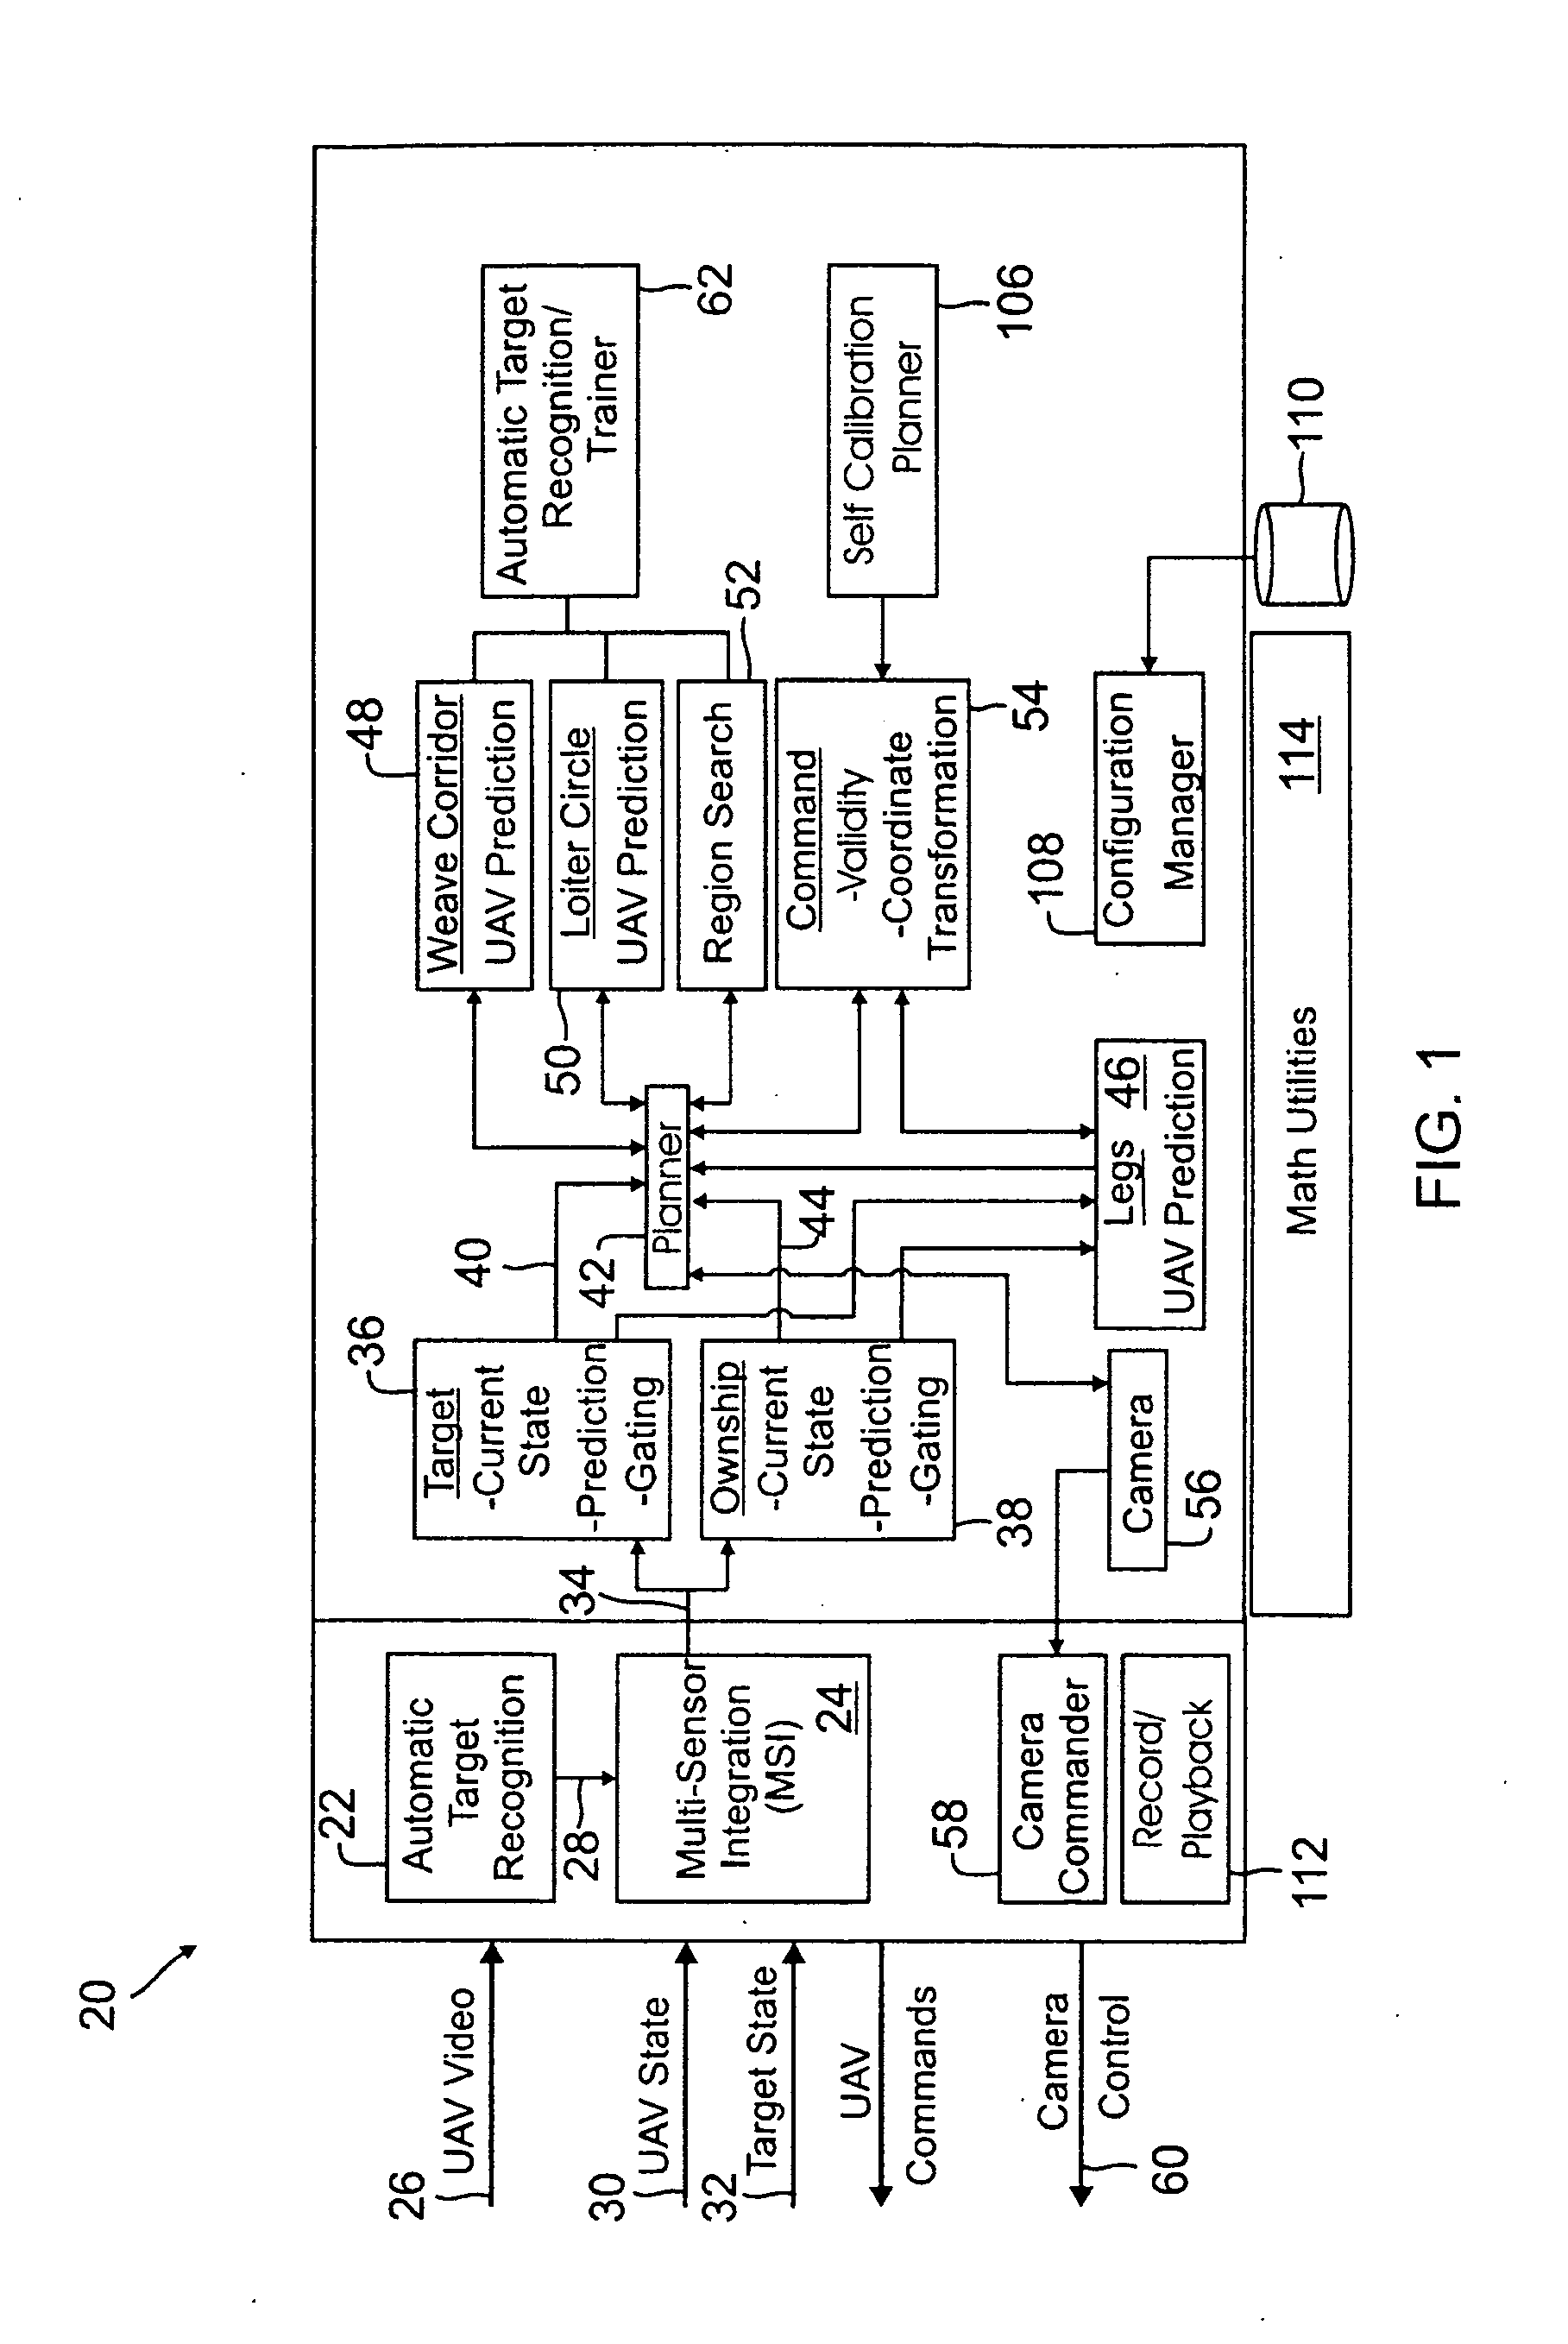 System and methods relating to autonomous tracking and surveillance